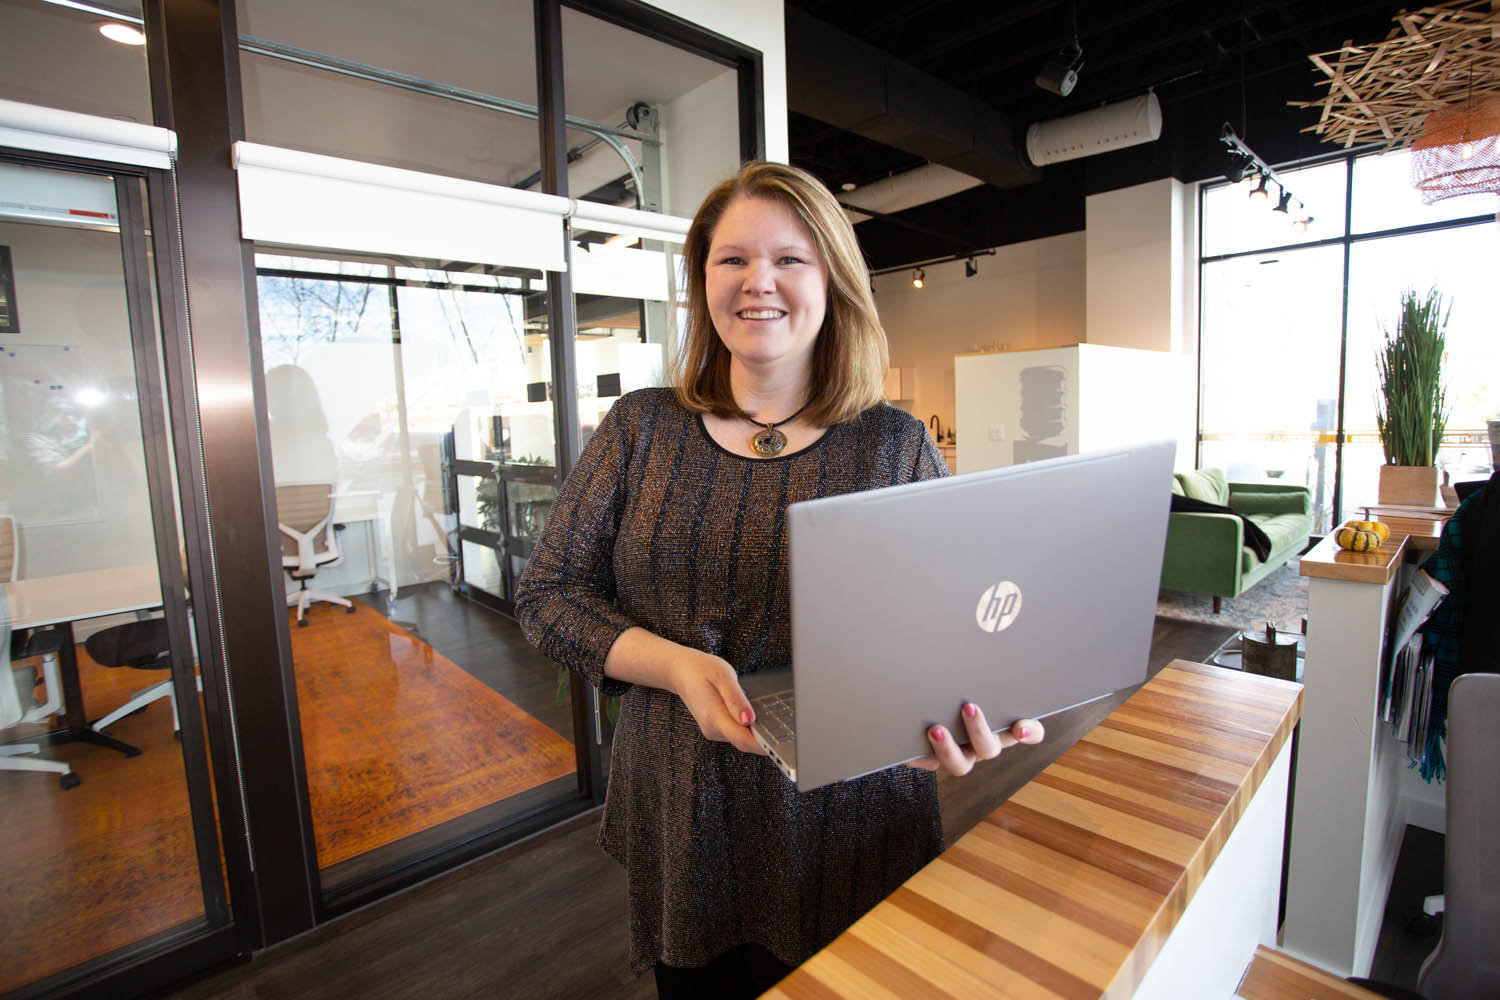 READY TO SHIP: Heather Noggle, CEO and co-owner of Export Internet Trade Systems Inc., plans to release an updated version of the Global Wizard software in early 2020.